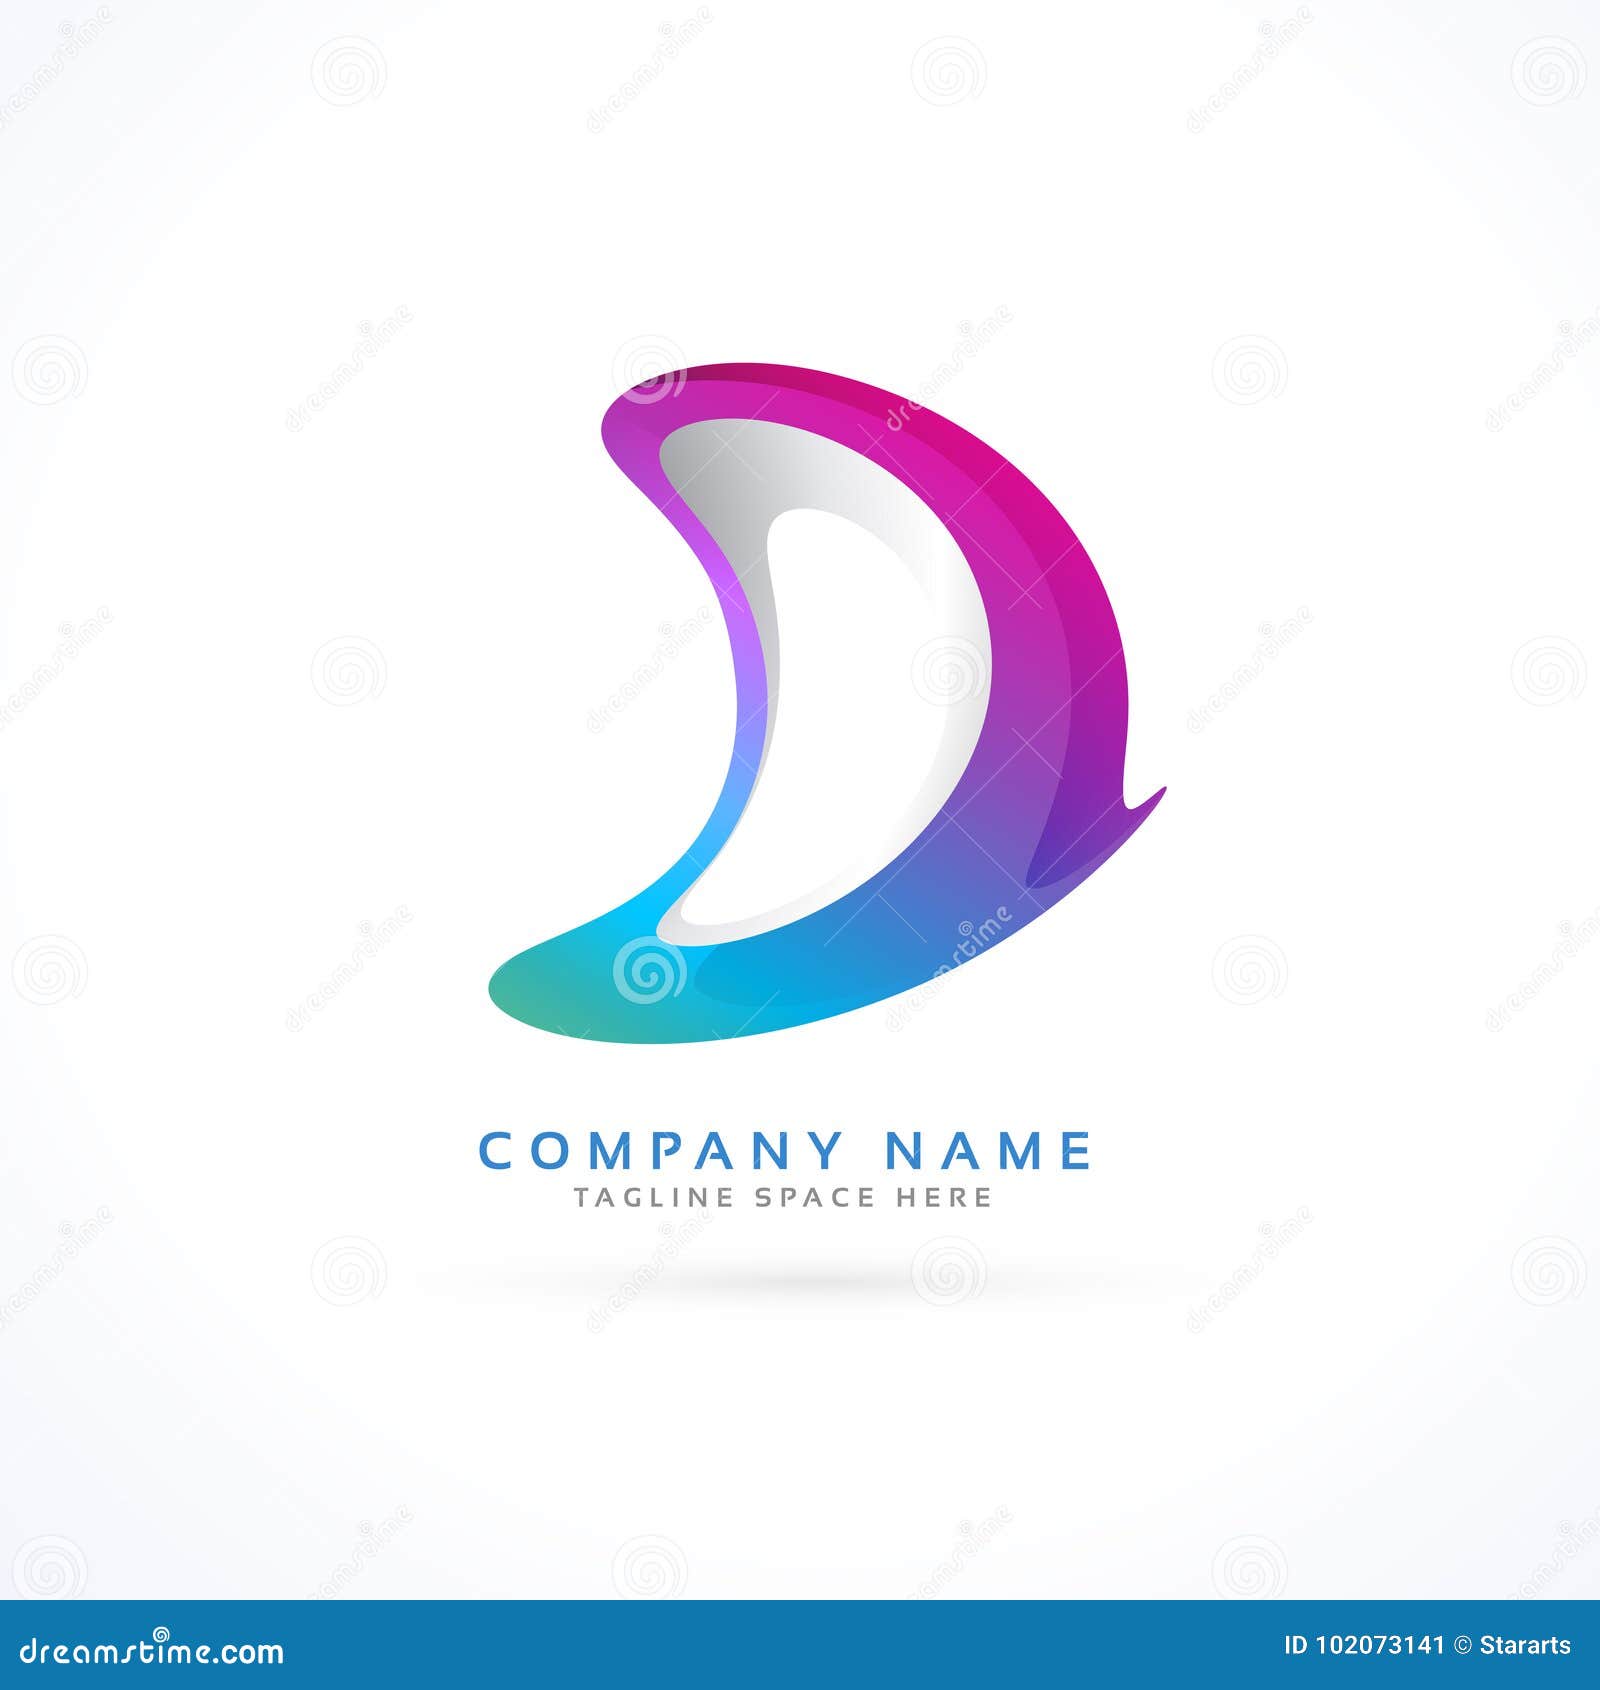 Abstract Letter D Creative Logo Stock Vector - Illustration of shapes ...